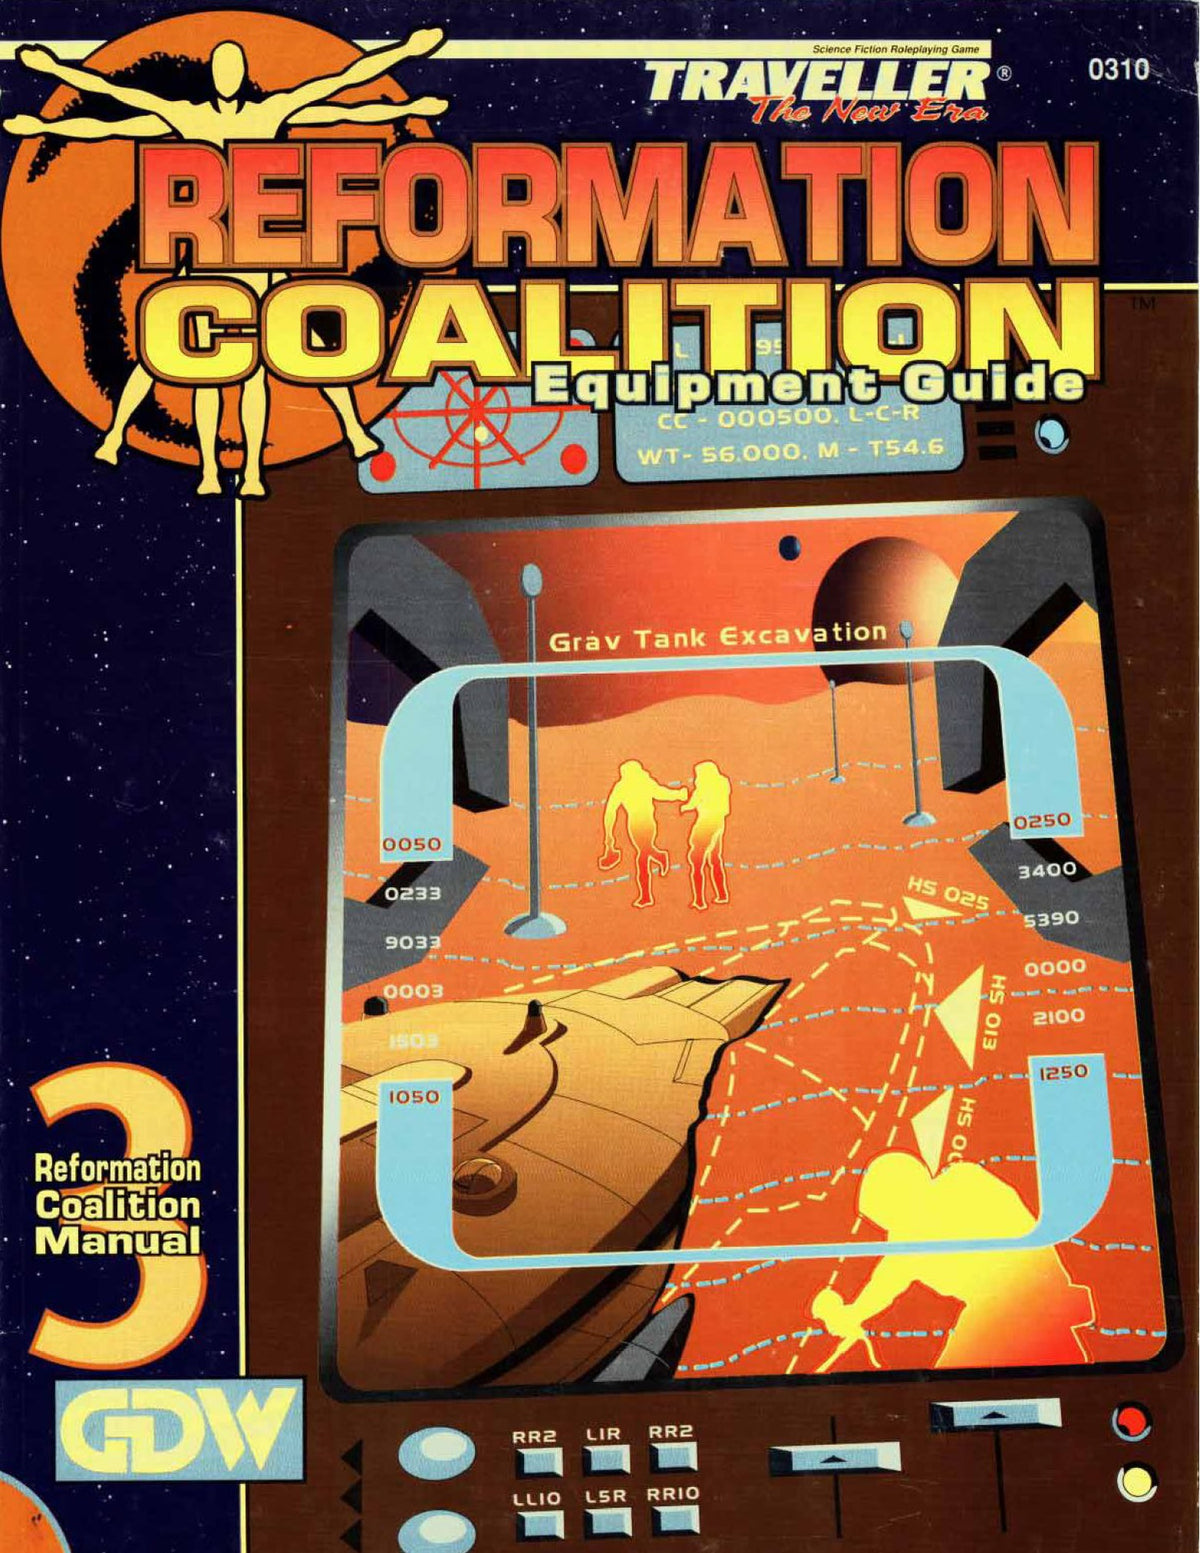 Reformation Coalition Equipment Guide ebook